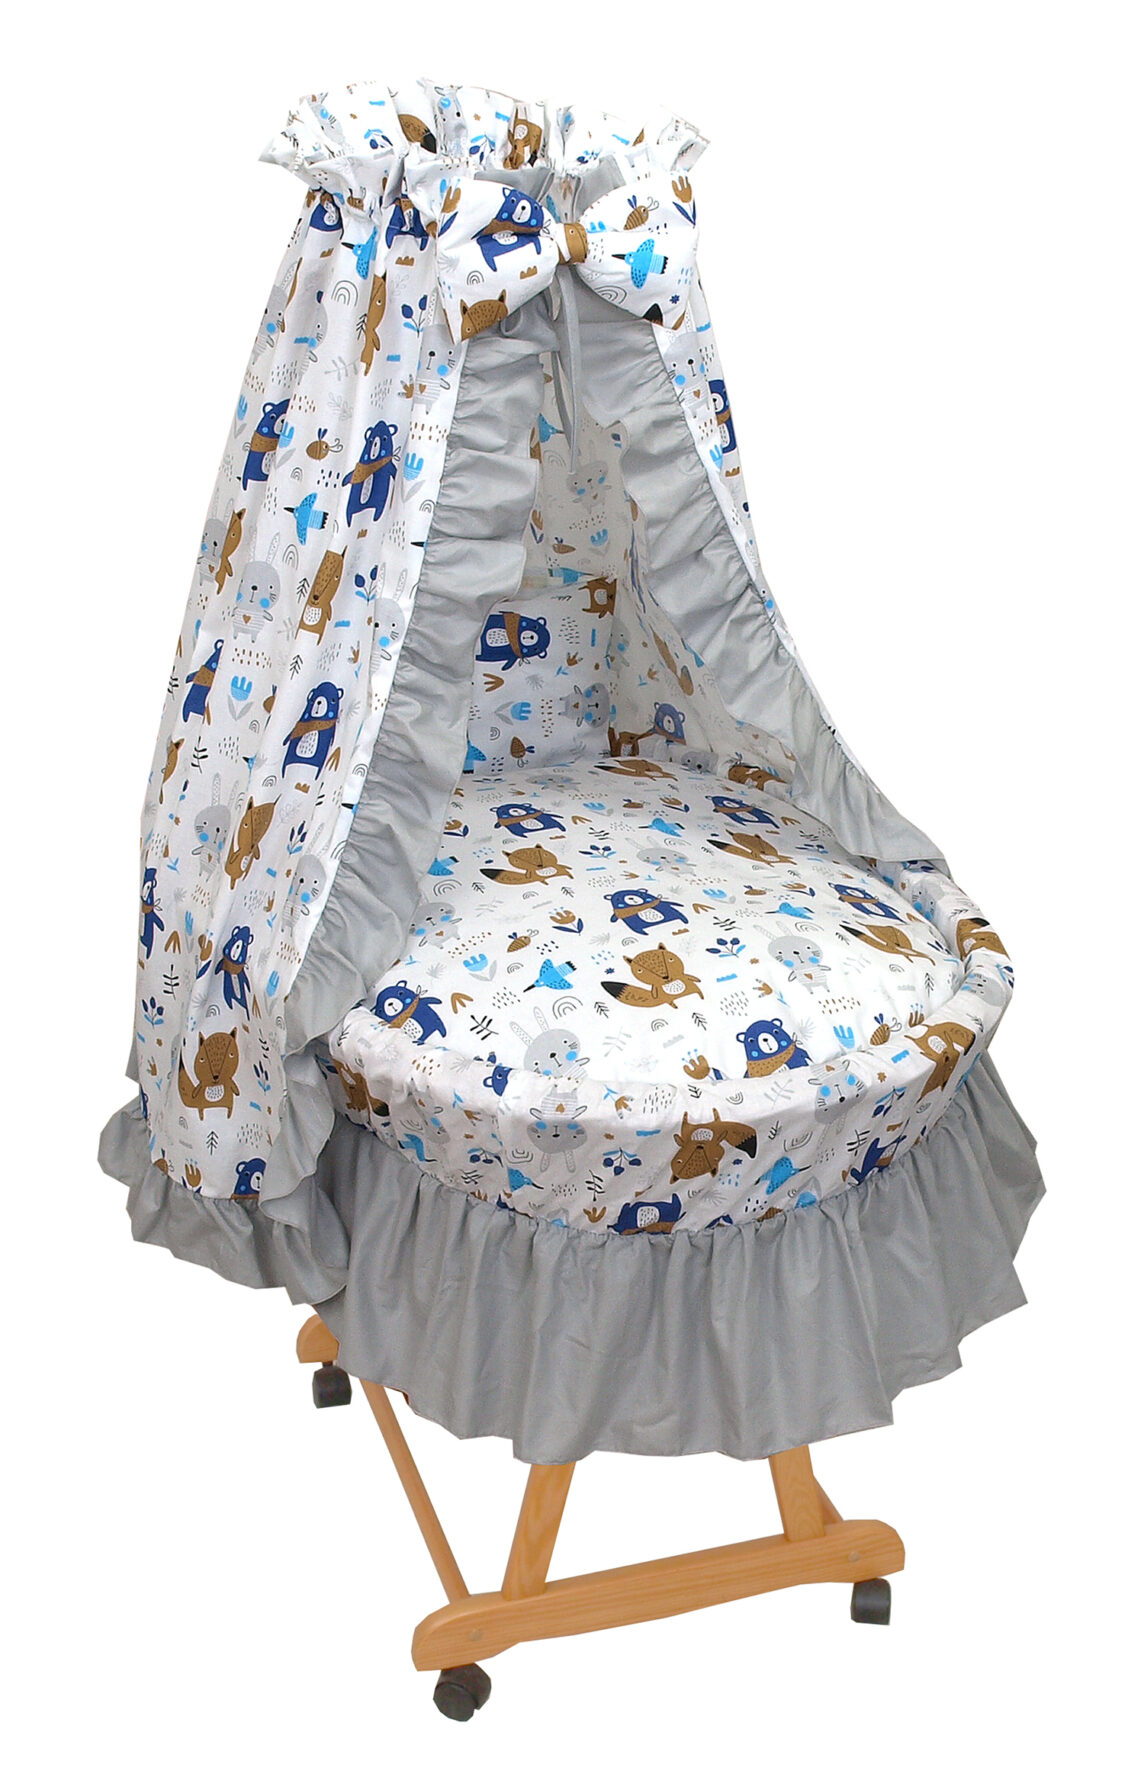 Moses basket with children's bedding